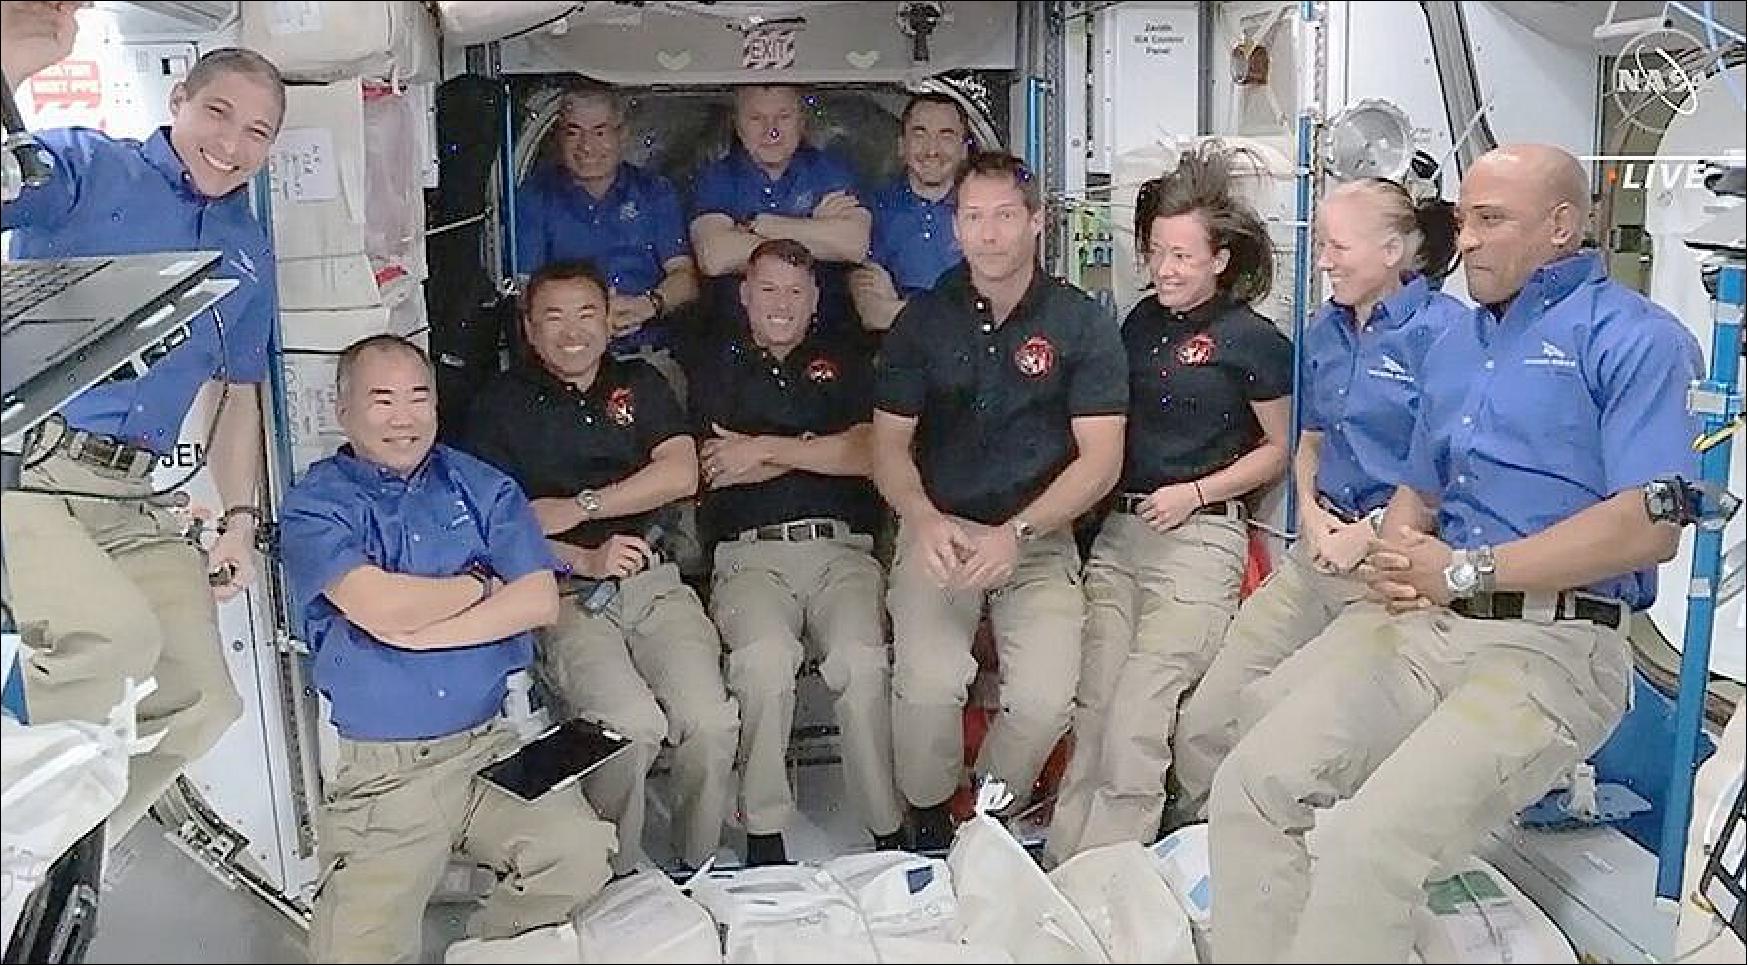 Figure 5: The four astronauts on the Crew-2 mission, in black shirts, join their colleagues on the International Space Station in ceremony just after the Crew Dragon Endeavour's arrival at the station April 24 (image credit: NASA TV)